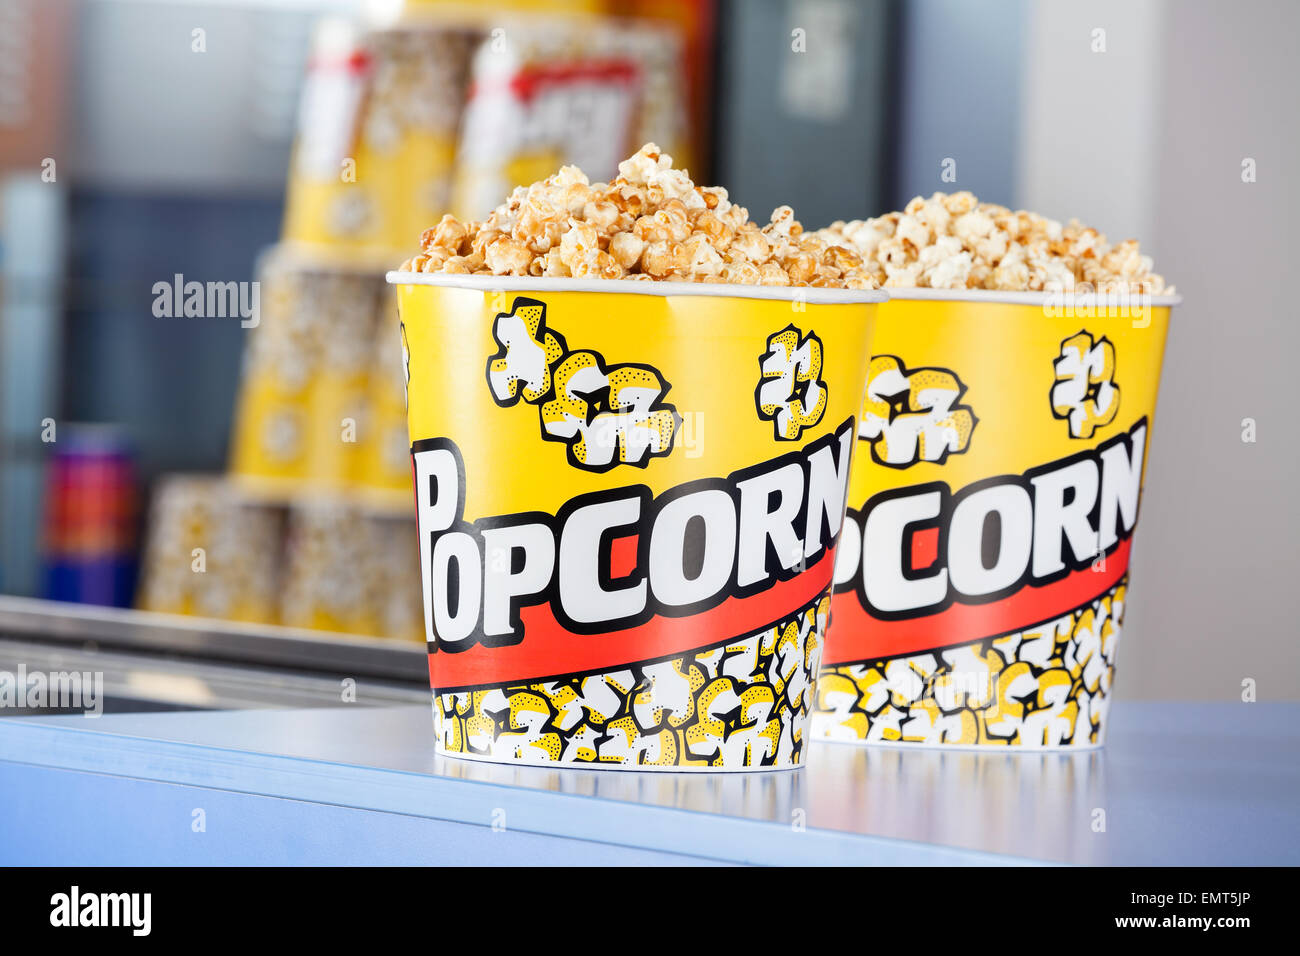 Popcorn Buckets At Concession Stand Stock Photo